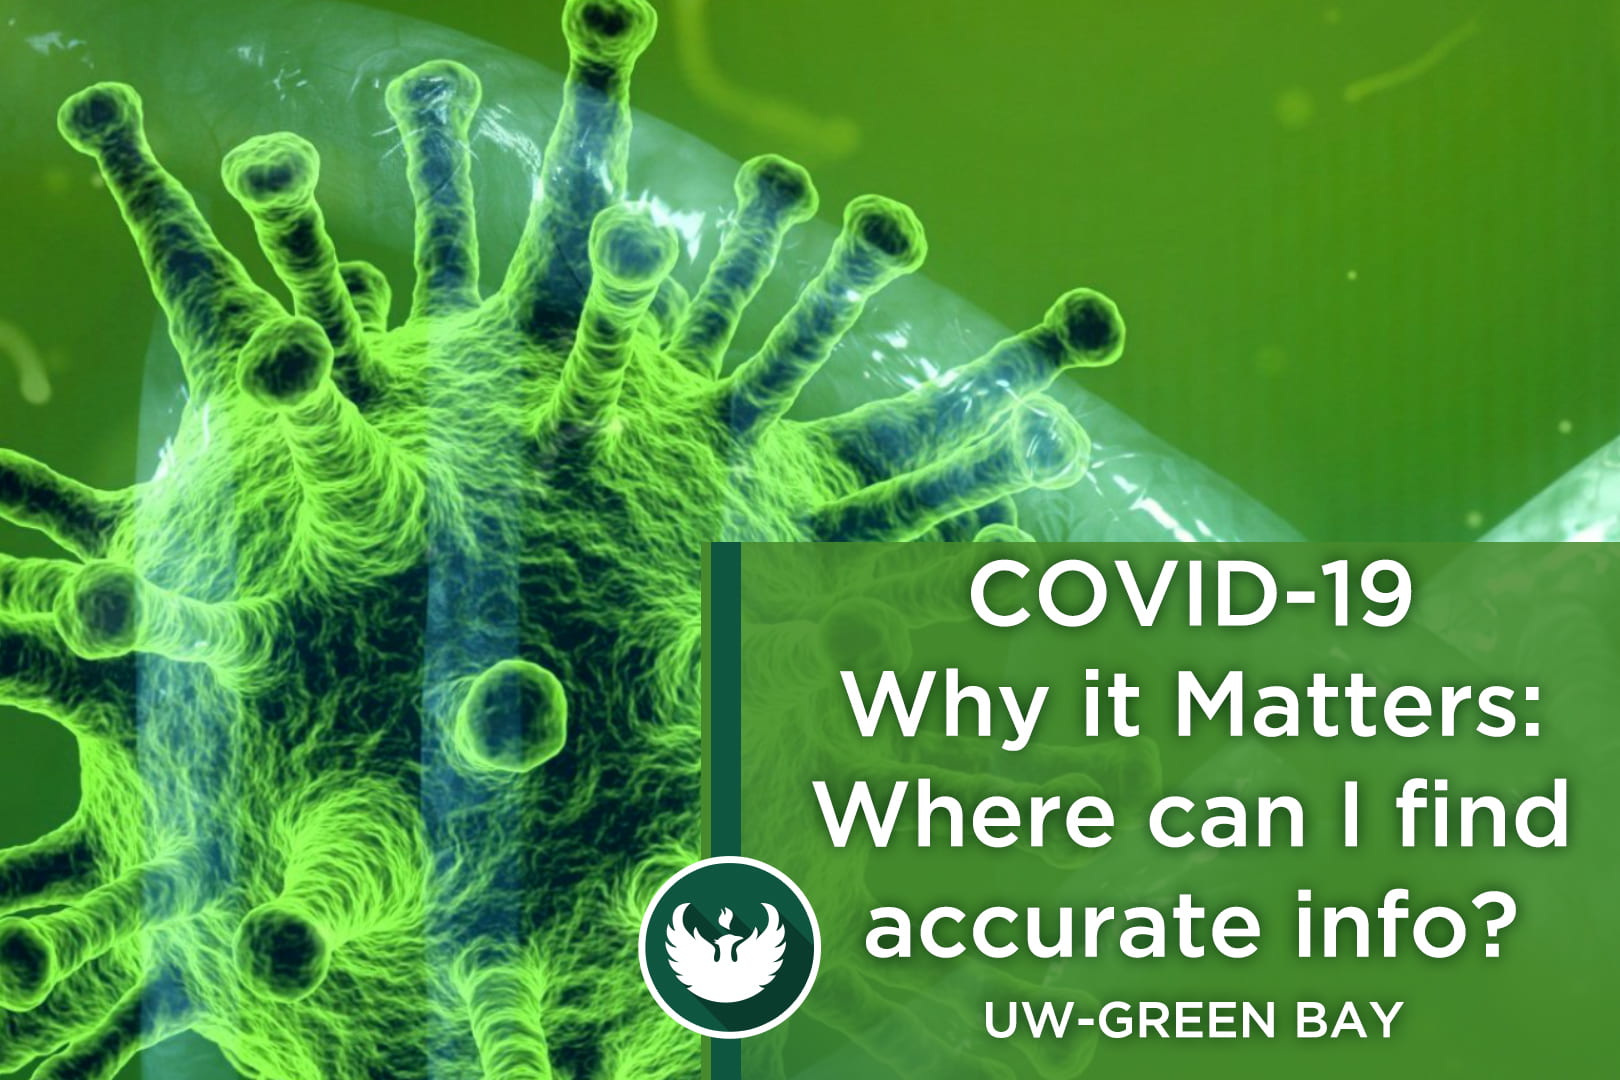 Graphic of the Covid-19 virus enlarged under a microscope with the text, "COVID-19 Why it Matters, Part 10: Where can I find accurate information?"